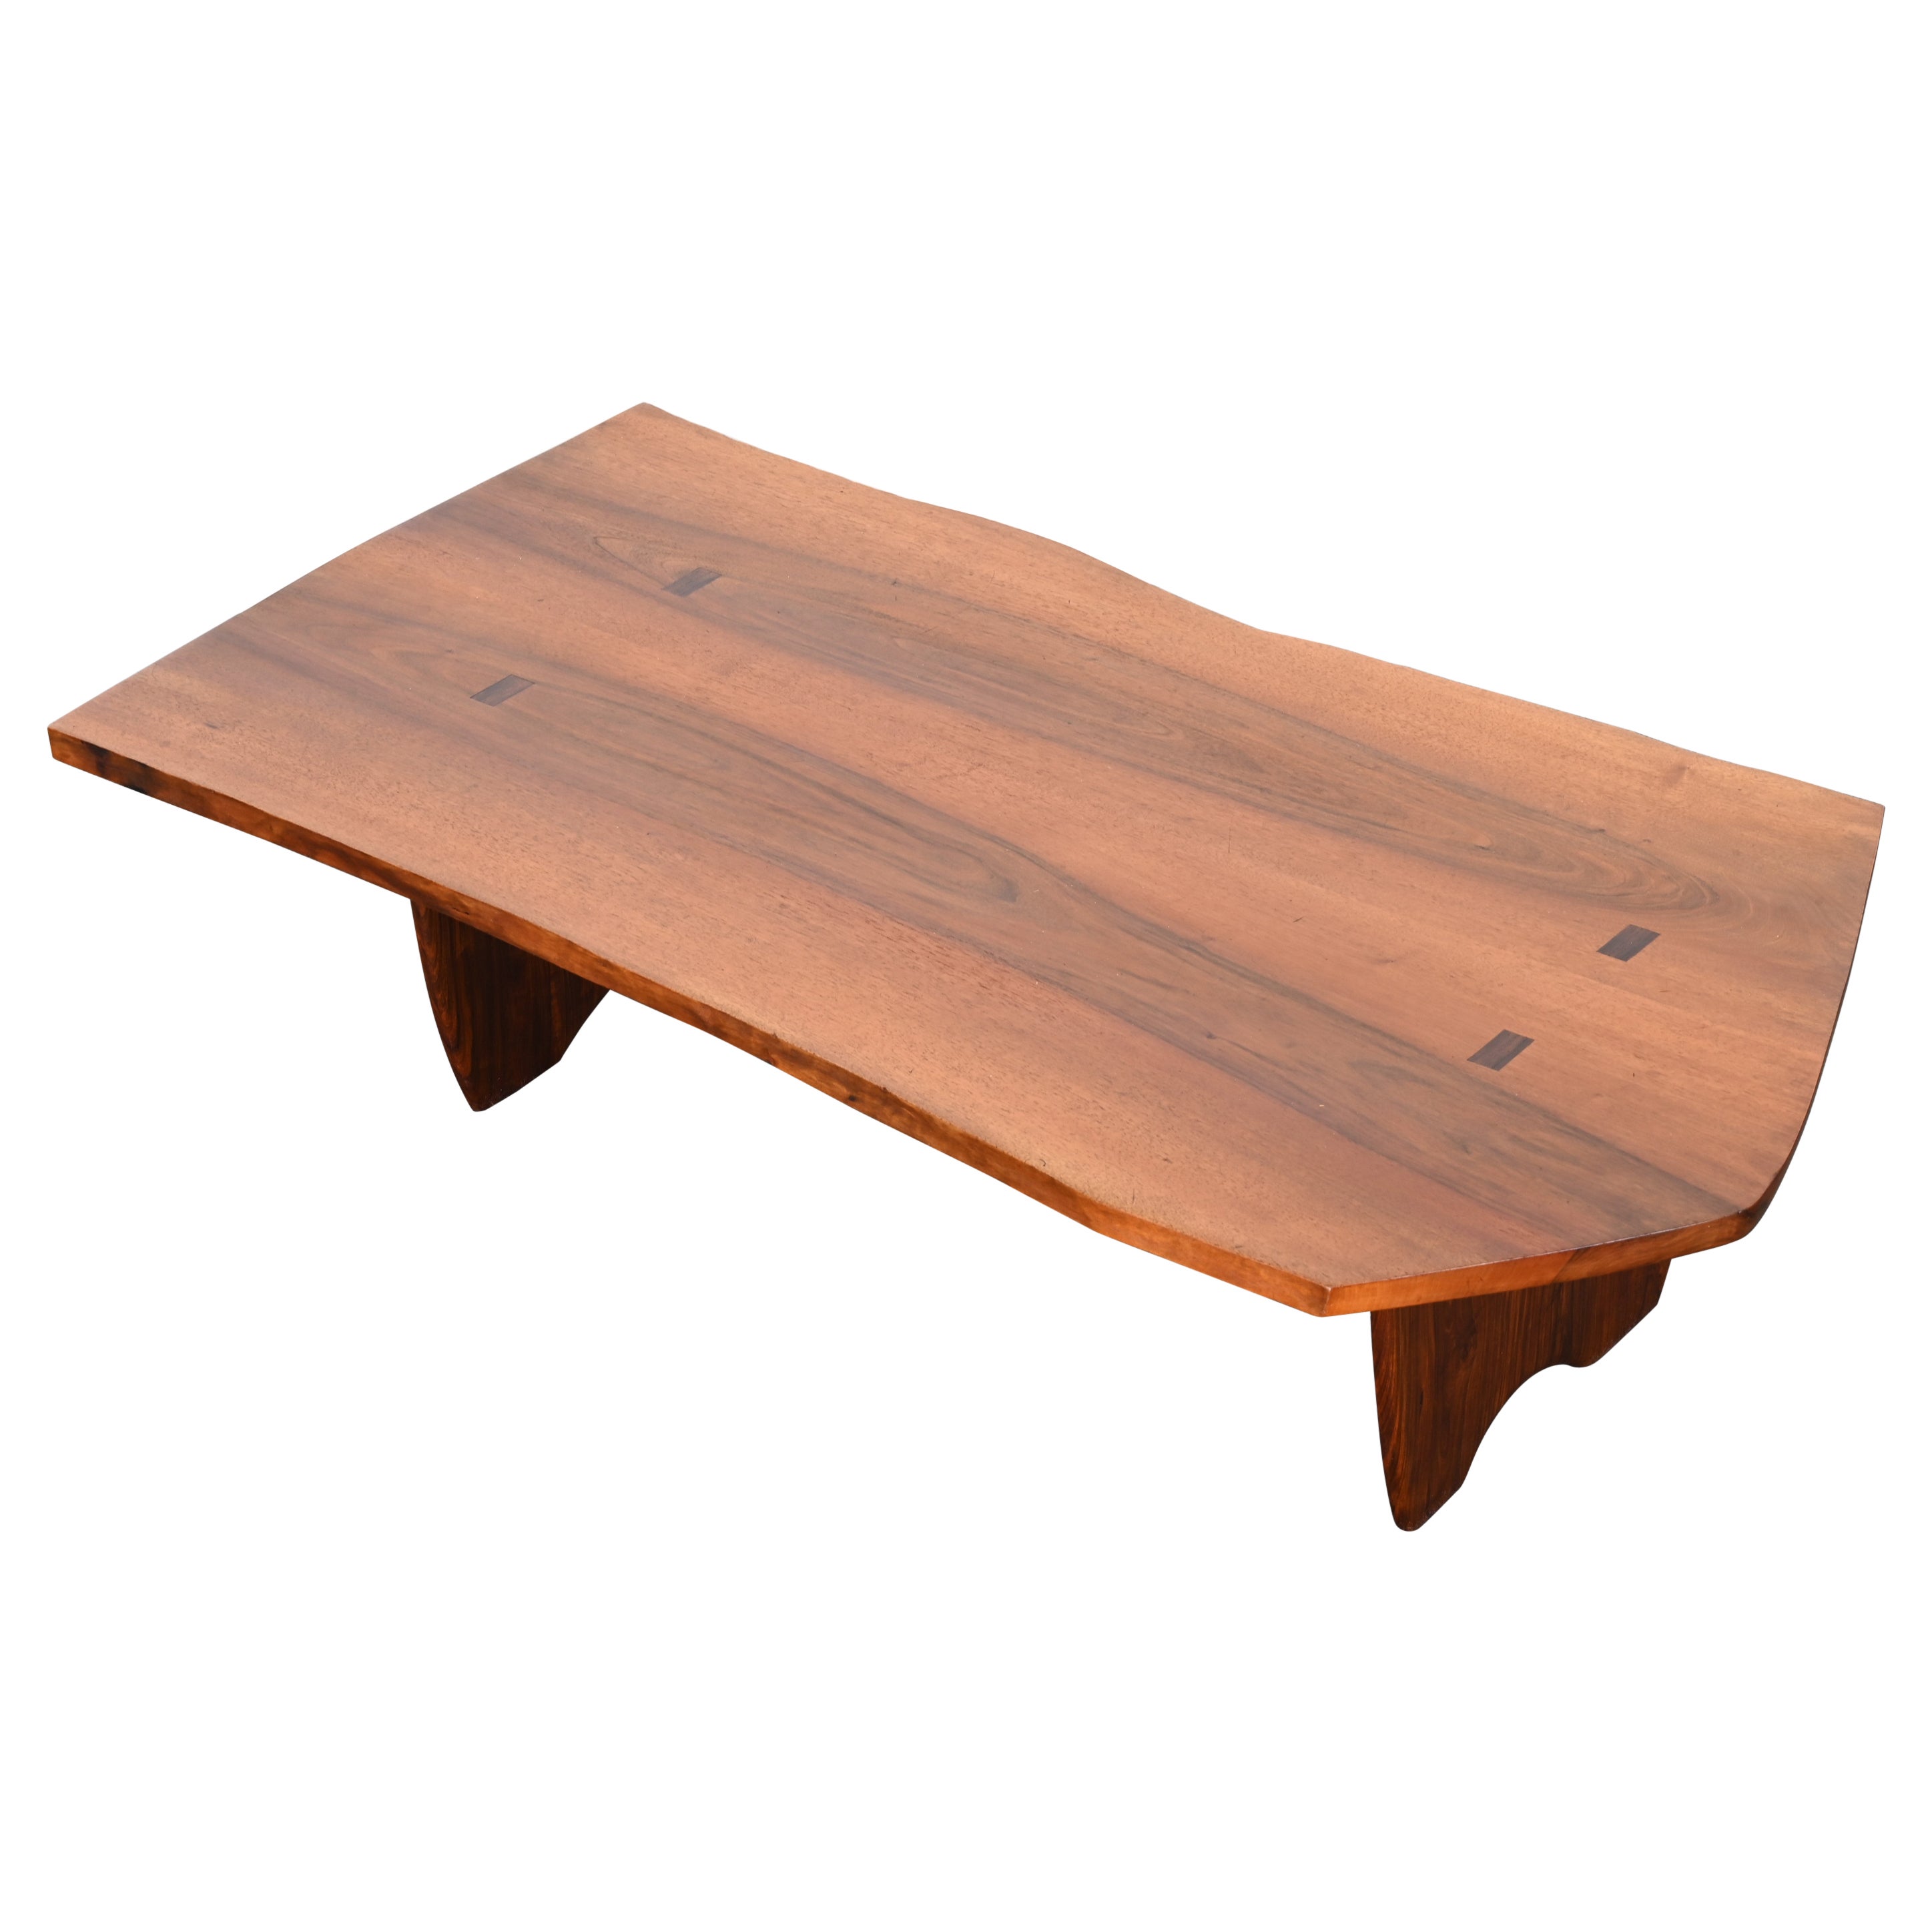 Live Edge Solid Walnut and Rosewood Coffee Table by Richard Rothbard, 1968